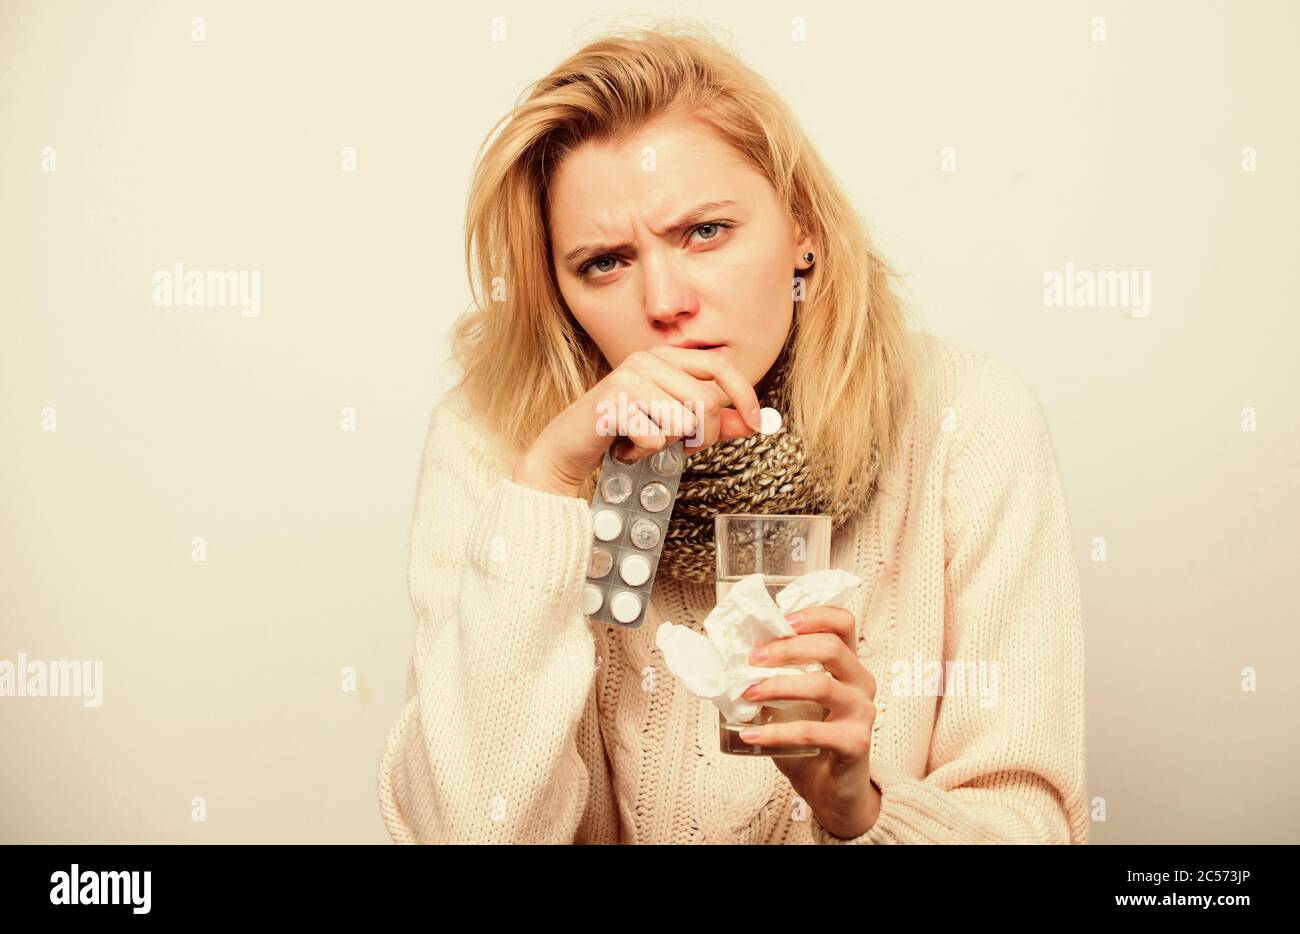 Pills to make her healthy. Ill woman treating symptoms caused by cold or flu. Medication and increased fluid intake. Unhealthy woman holding pills and water glass. Sick girl taking anti cold pill. Stock Photo